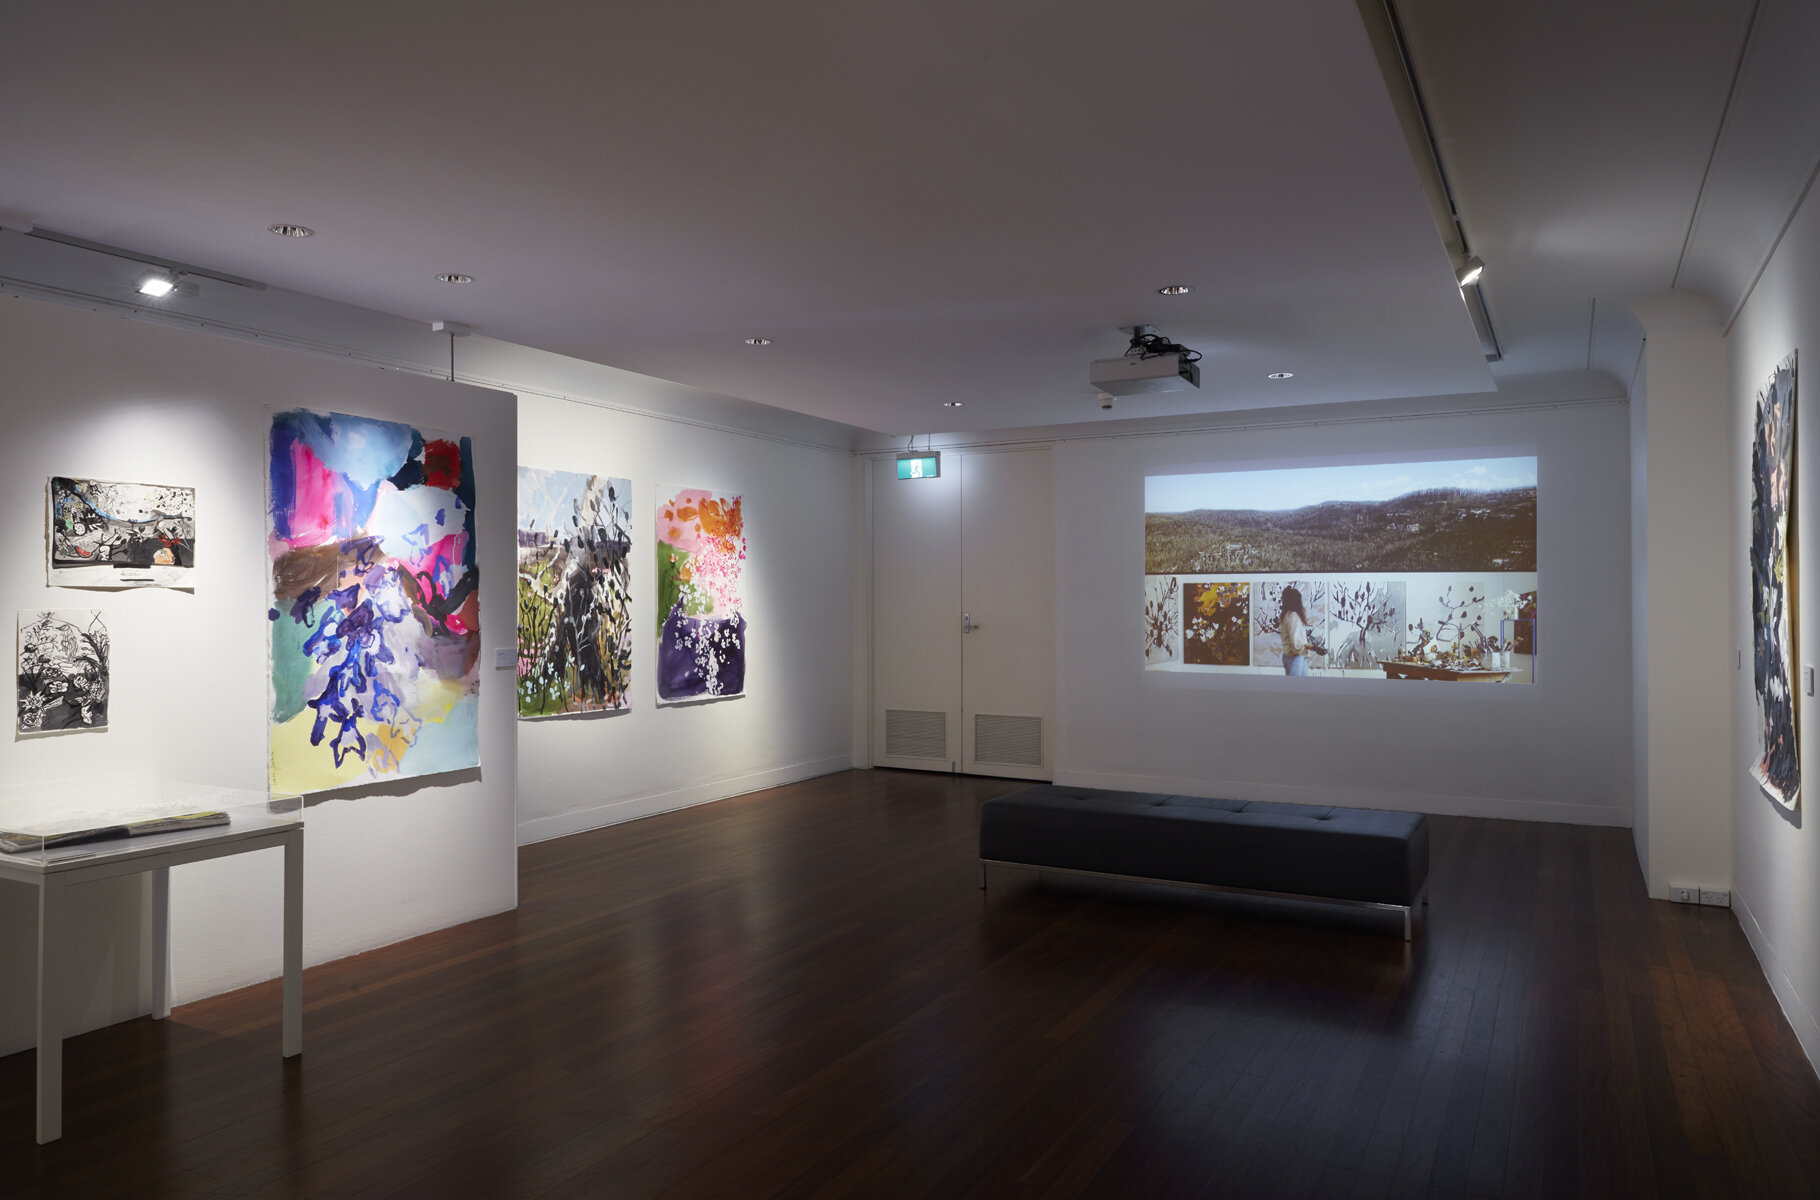  Manly Art Gallery and Museum   4 December 2020- 14 February 2021 